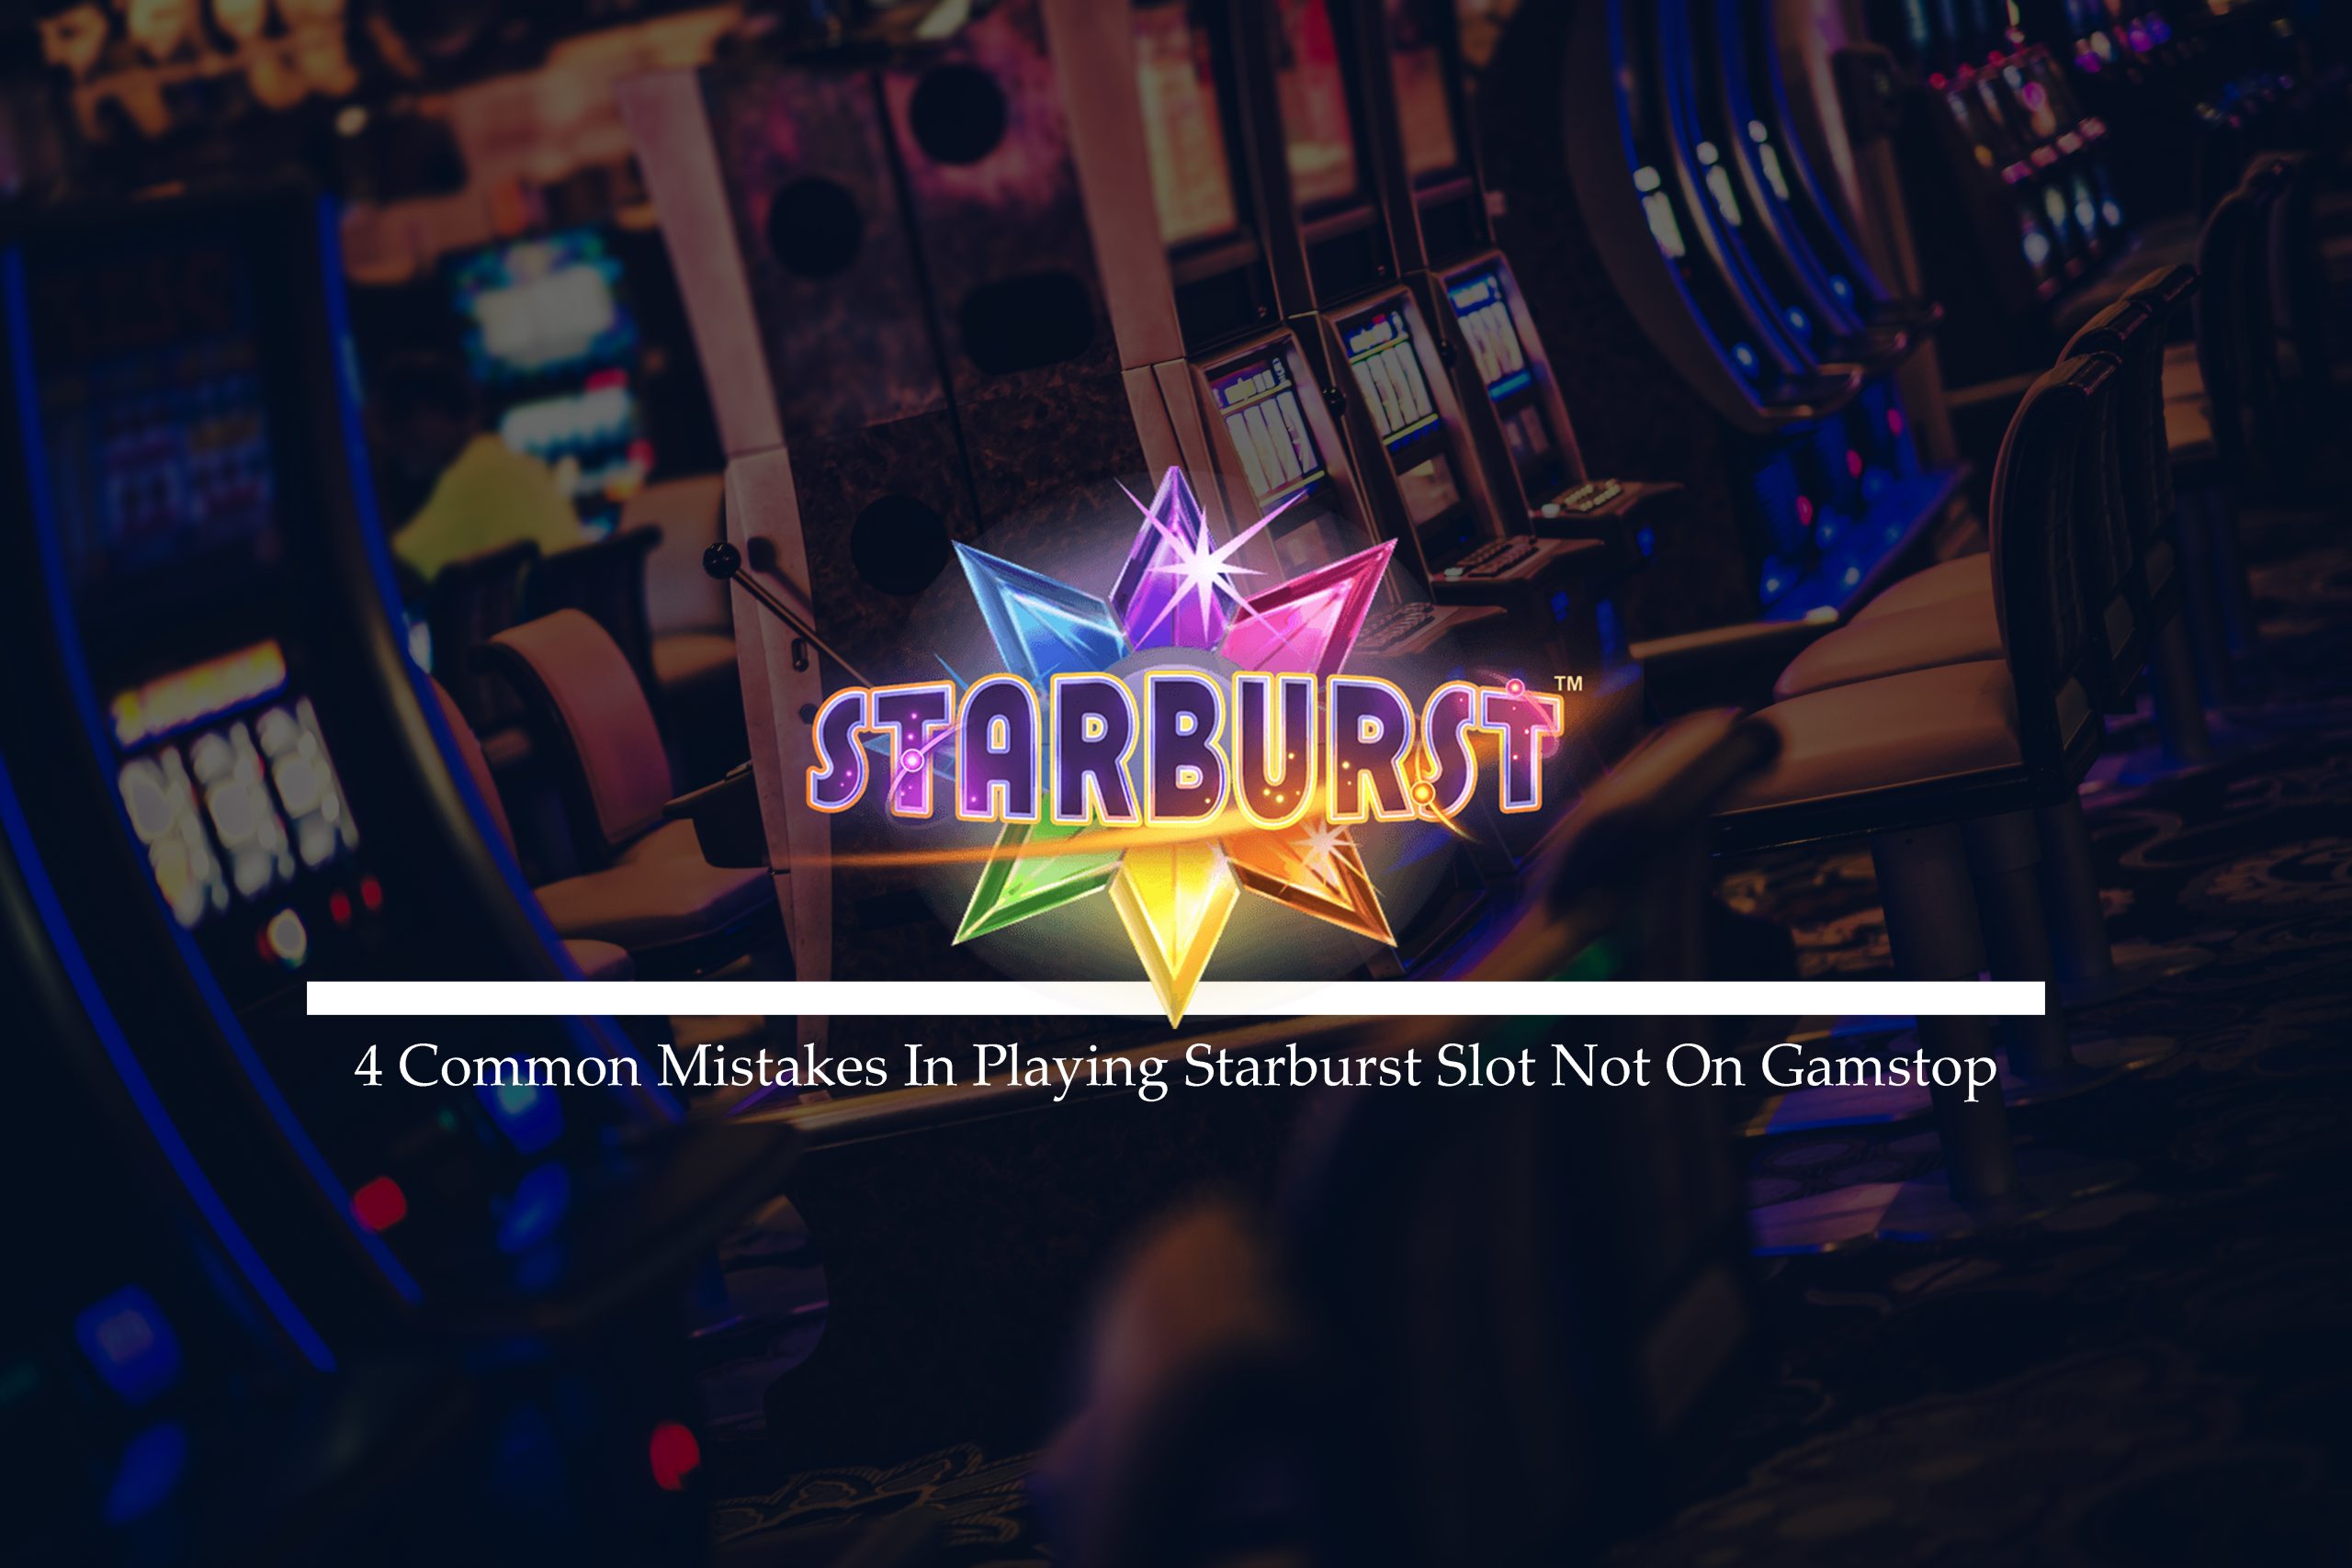 4 Common Mistakes In Playing Starburst Slot Not On Gamstop